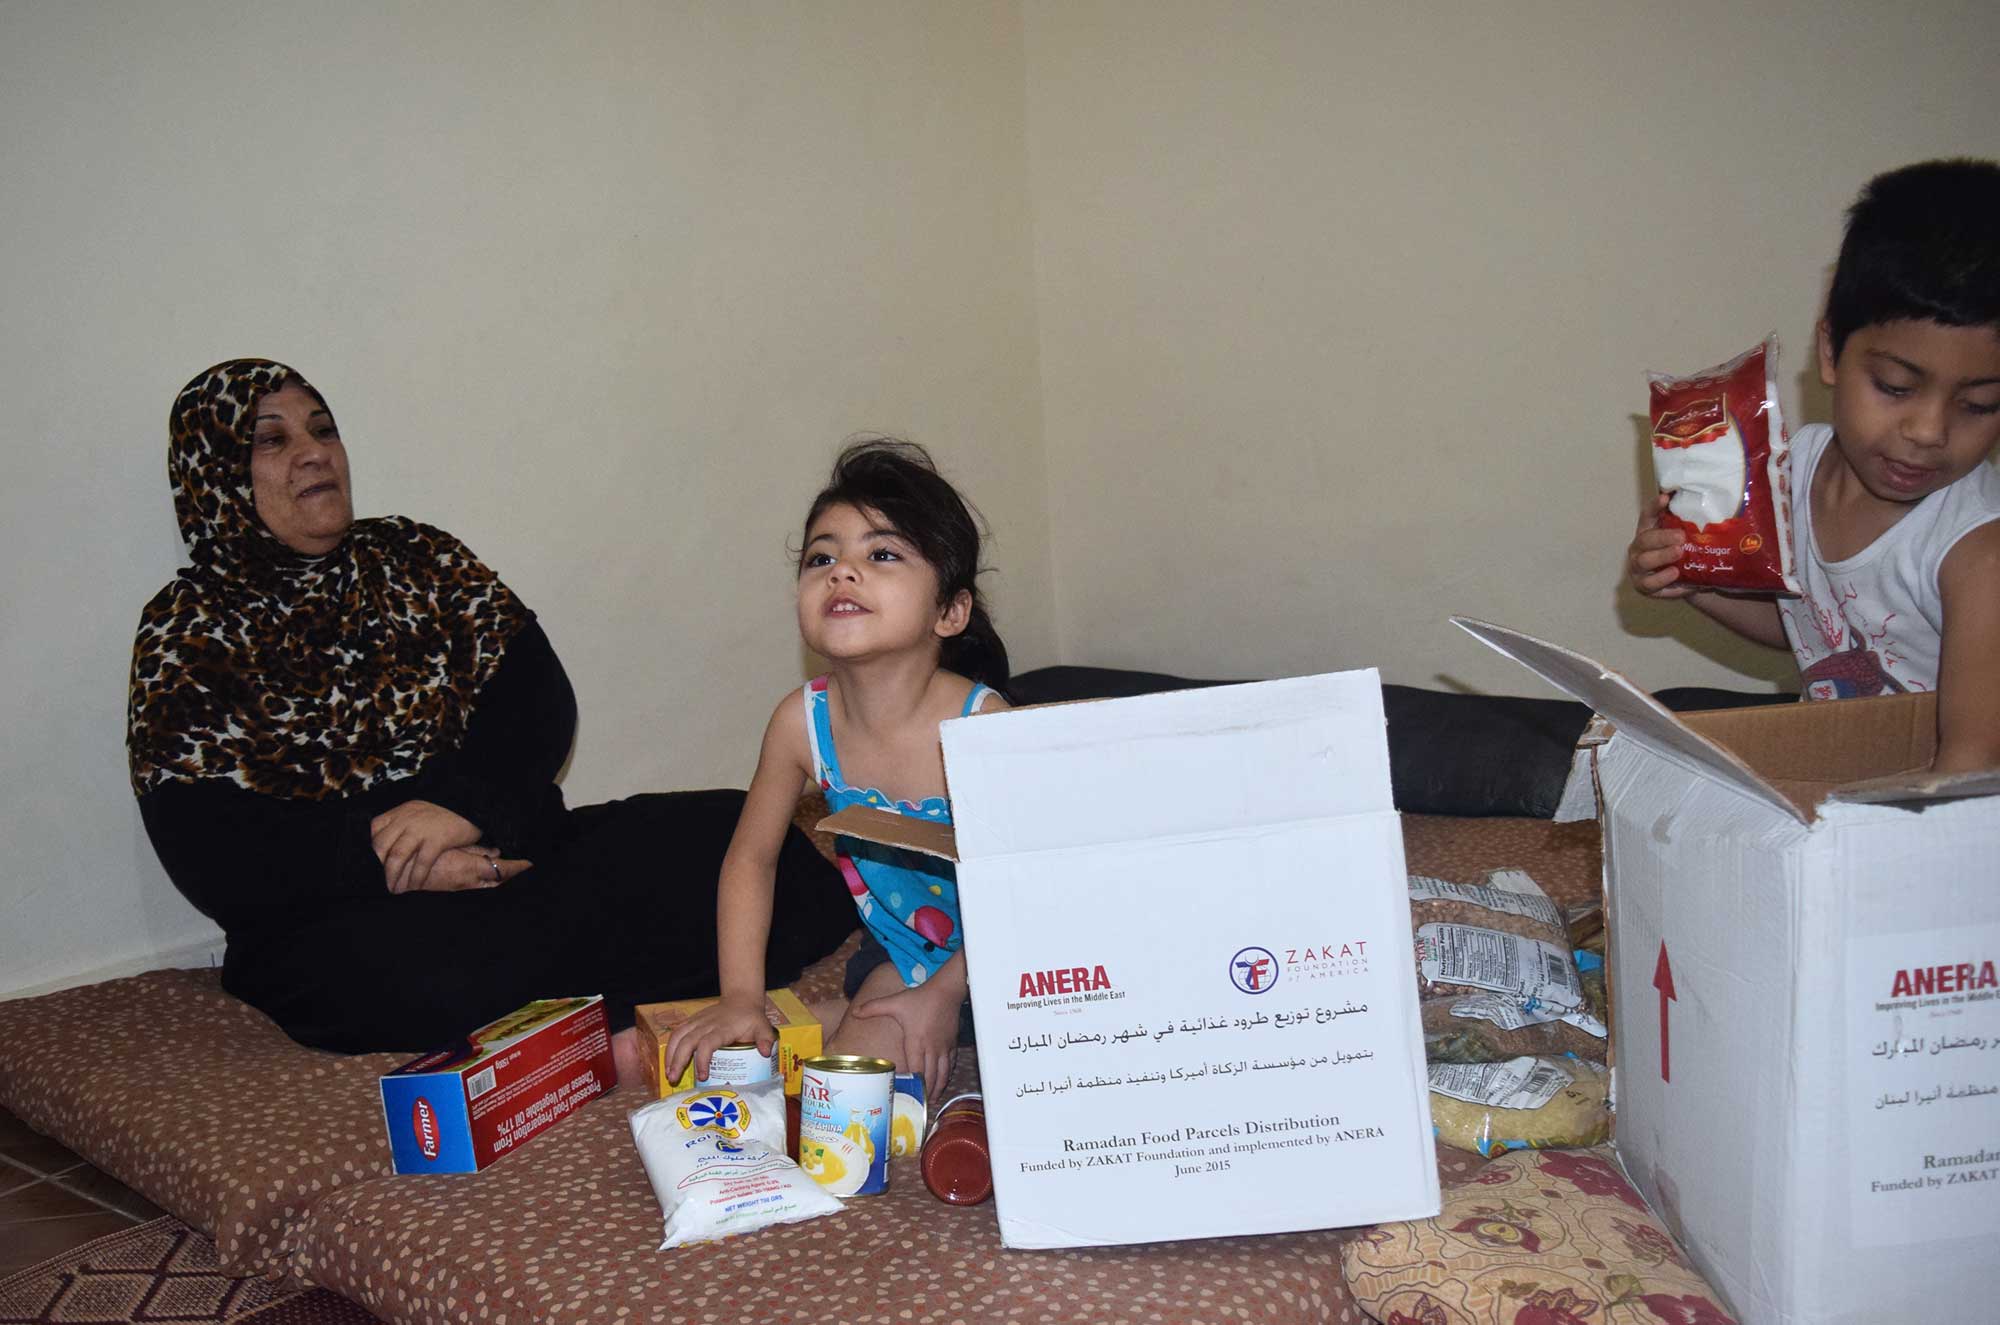 Four-year-old Nour El-Sham unpacks the food package she and her family has just received, thanks to funding from the Zakat Foundation.